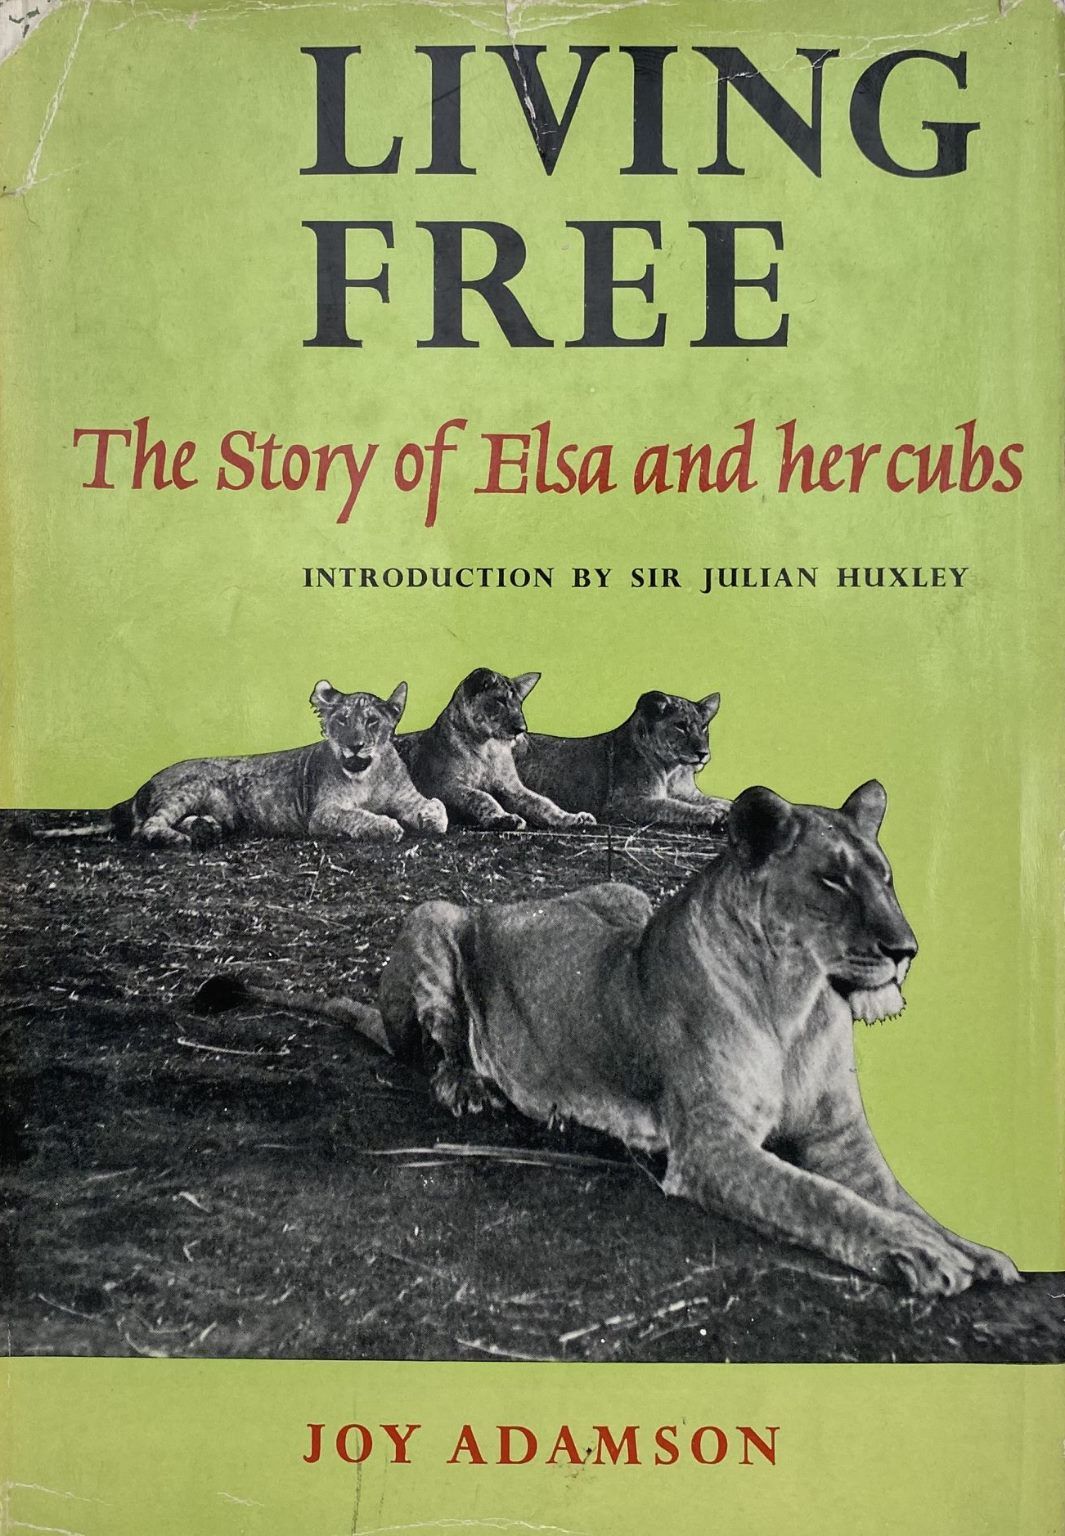 LIVING FREE: The Story of Elsa and her Cubs